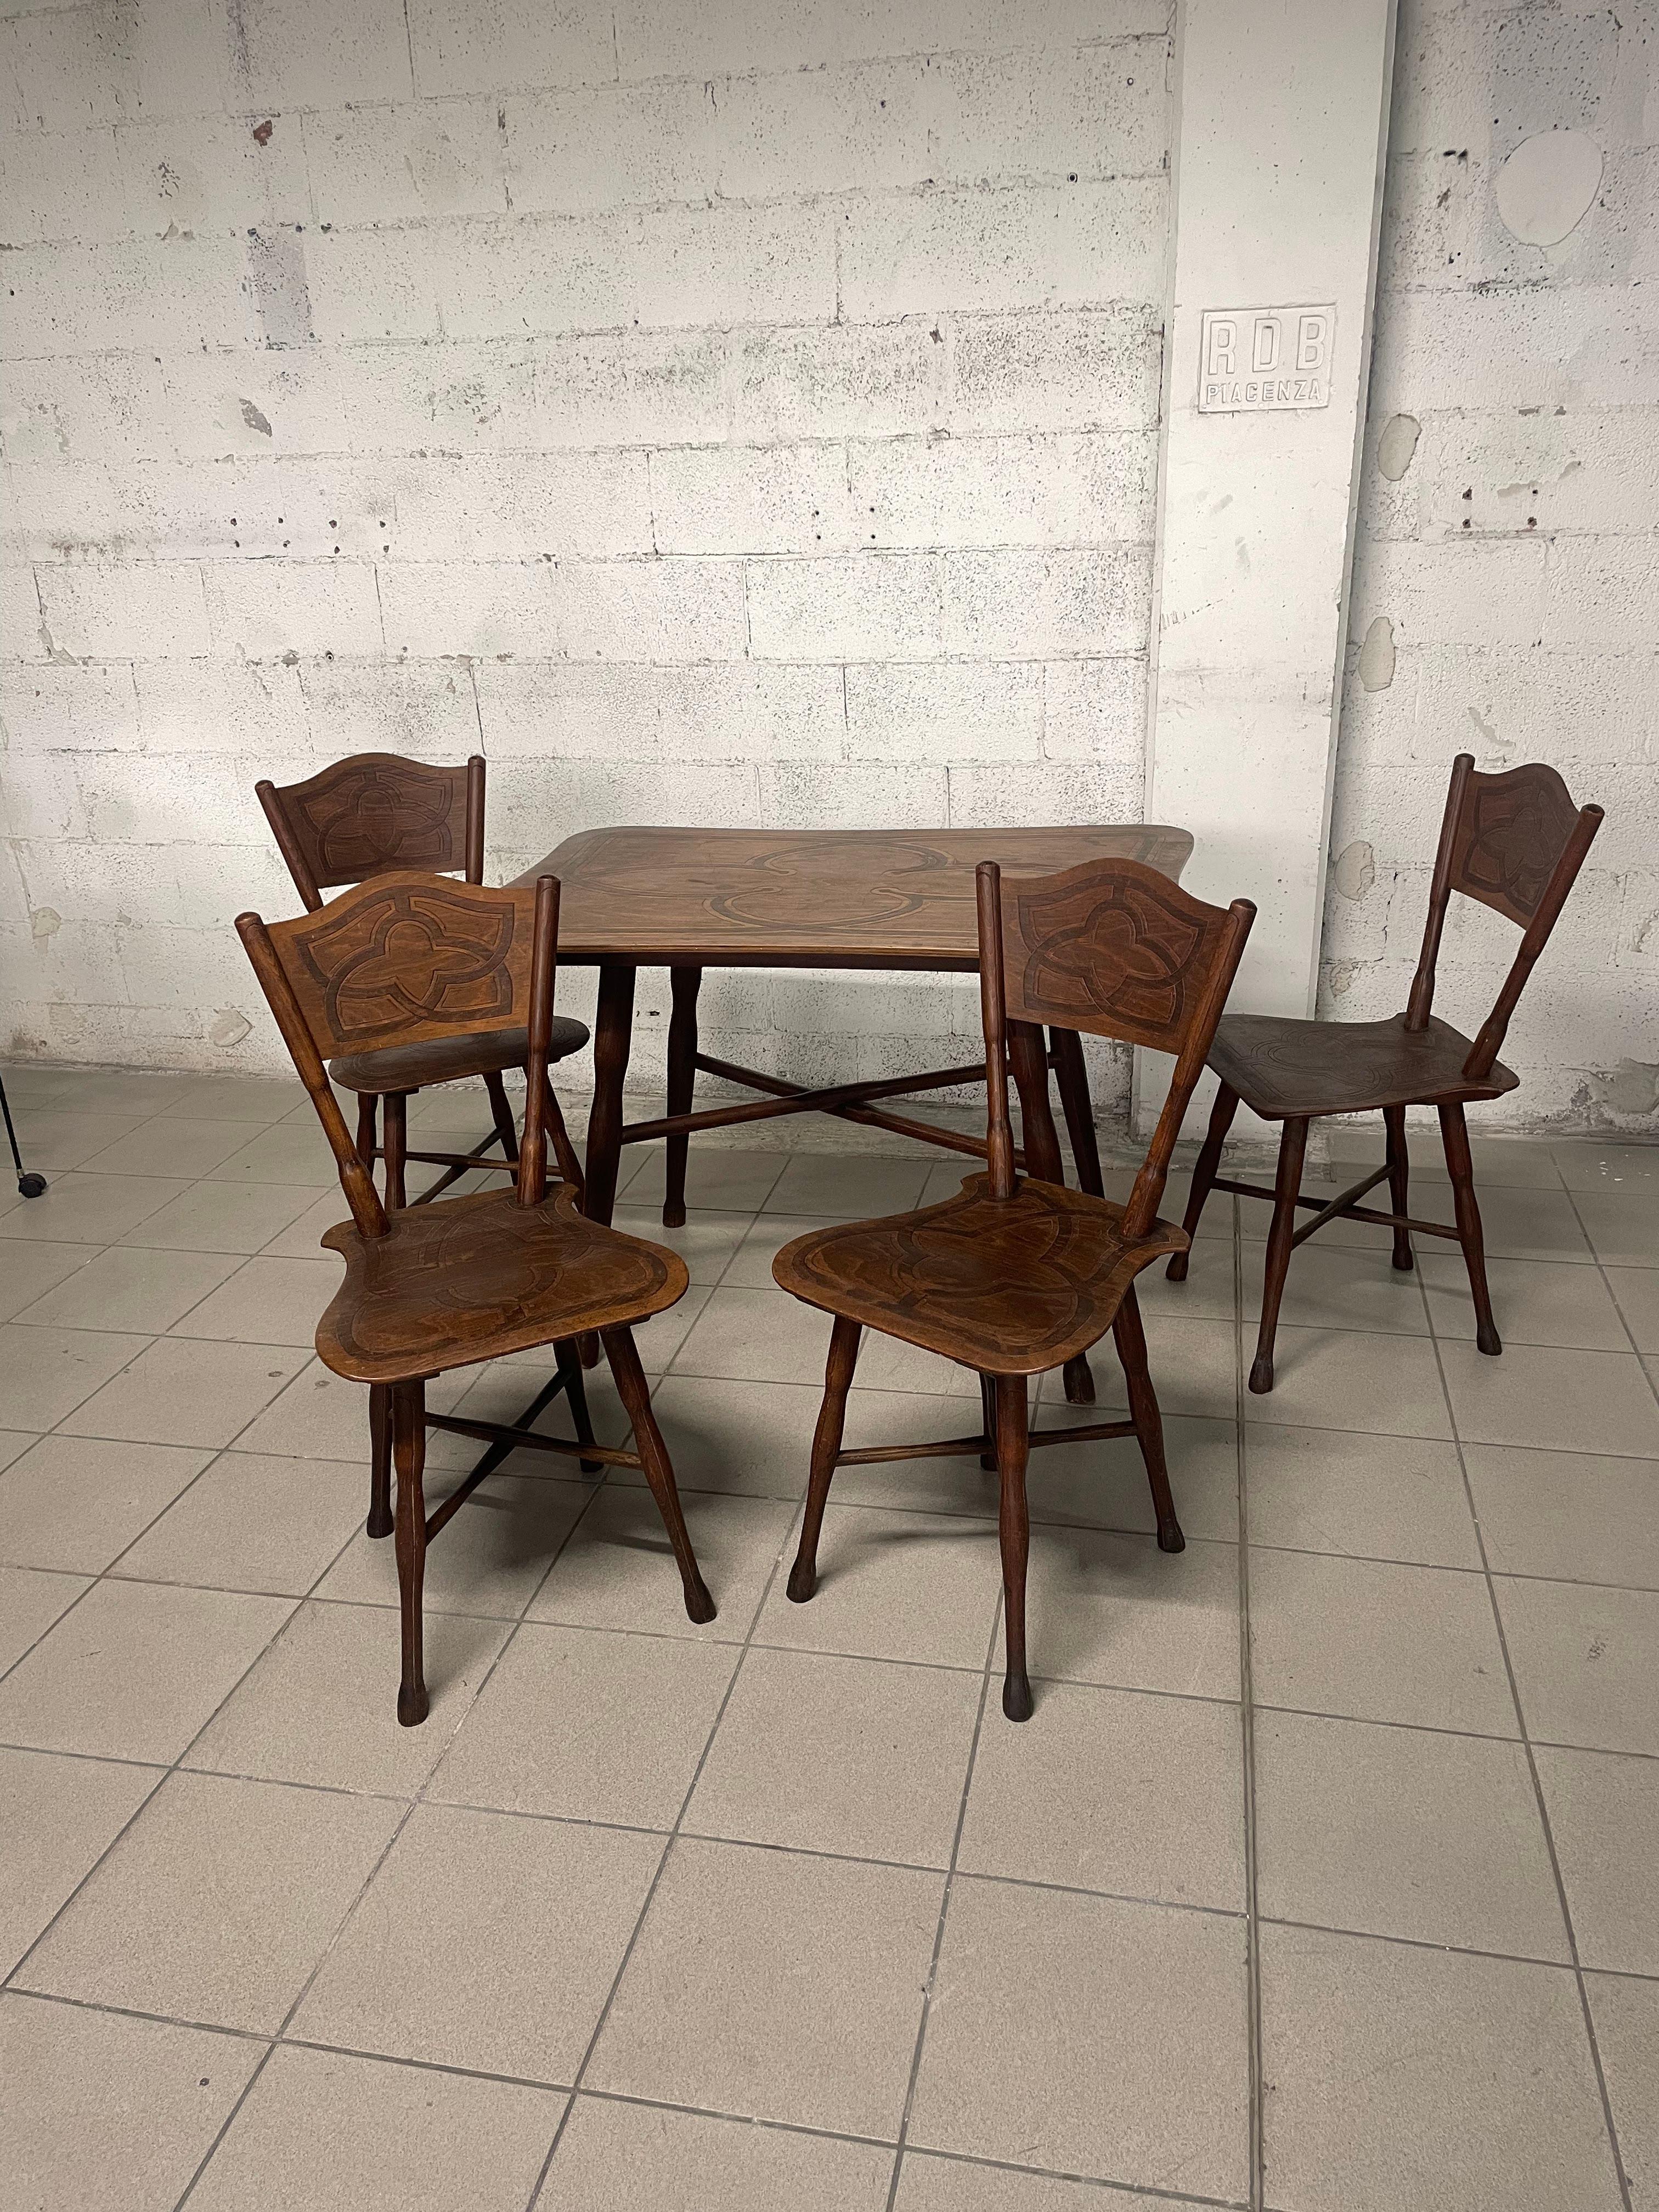 Set of 4 Thonet chairs and table, Austria, first half of 20th century For Sale 1